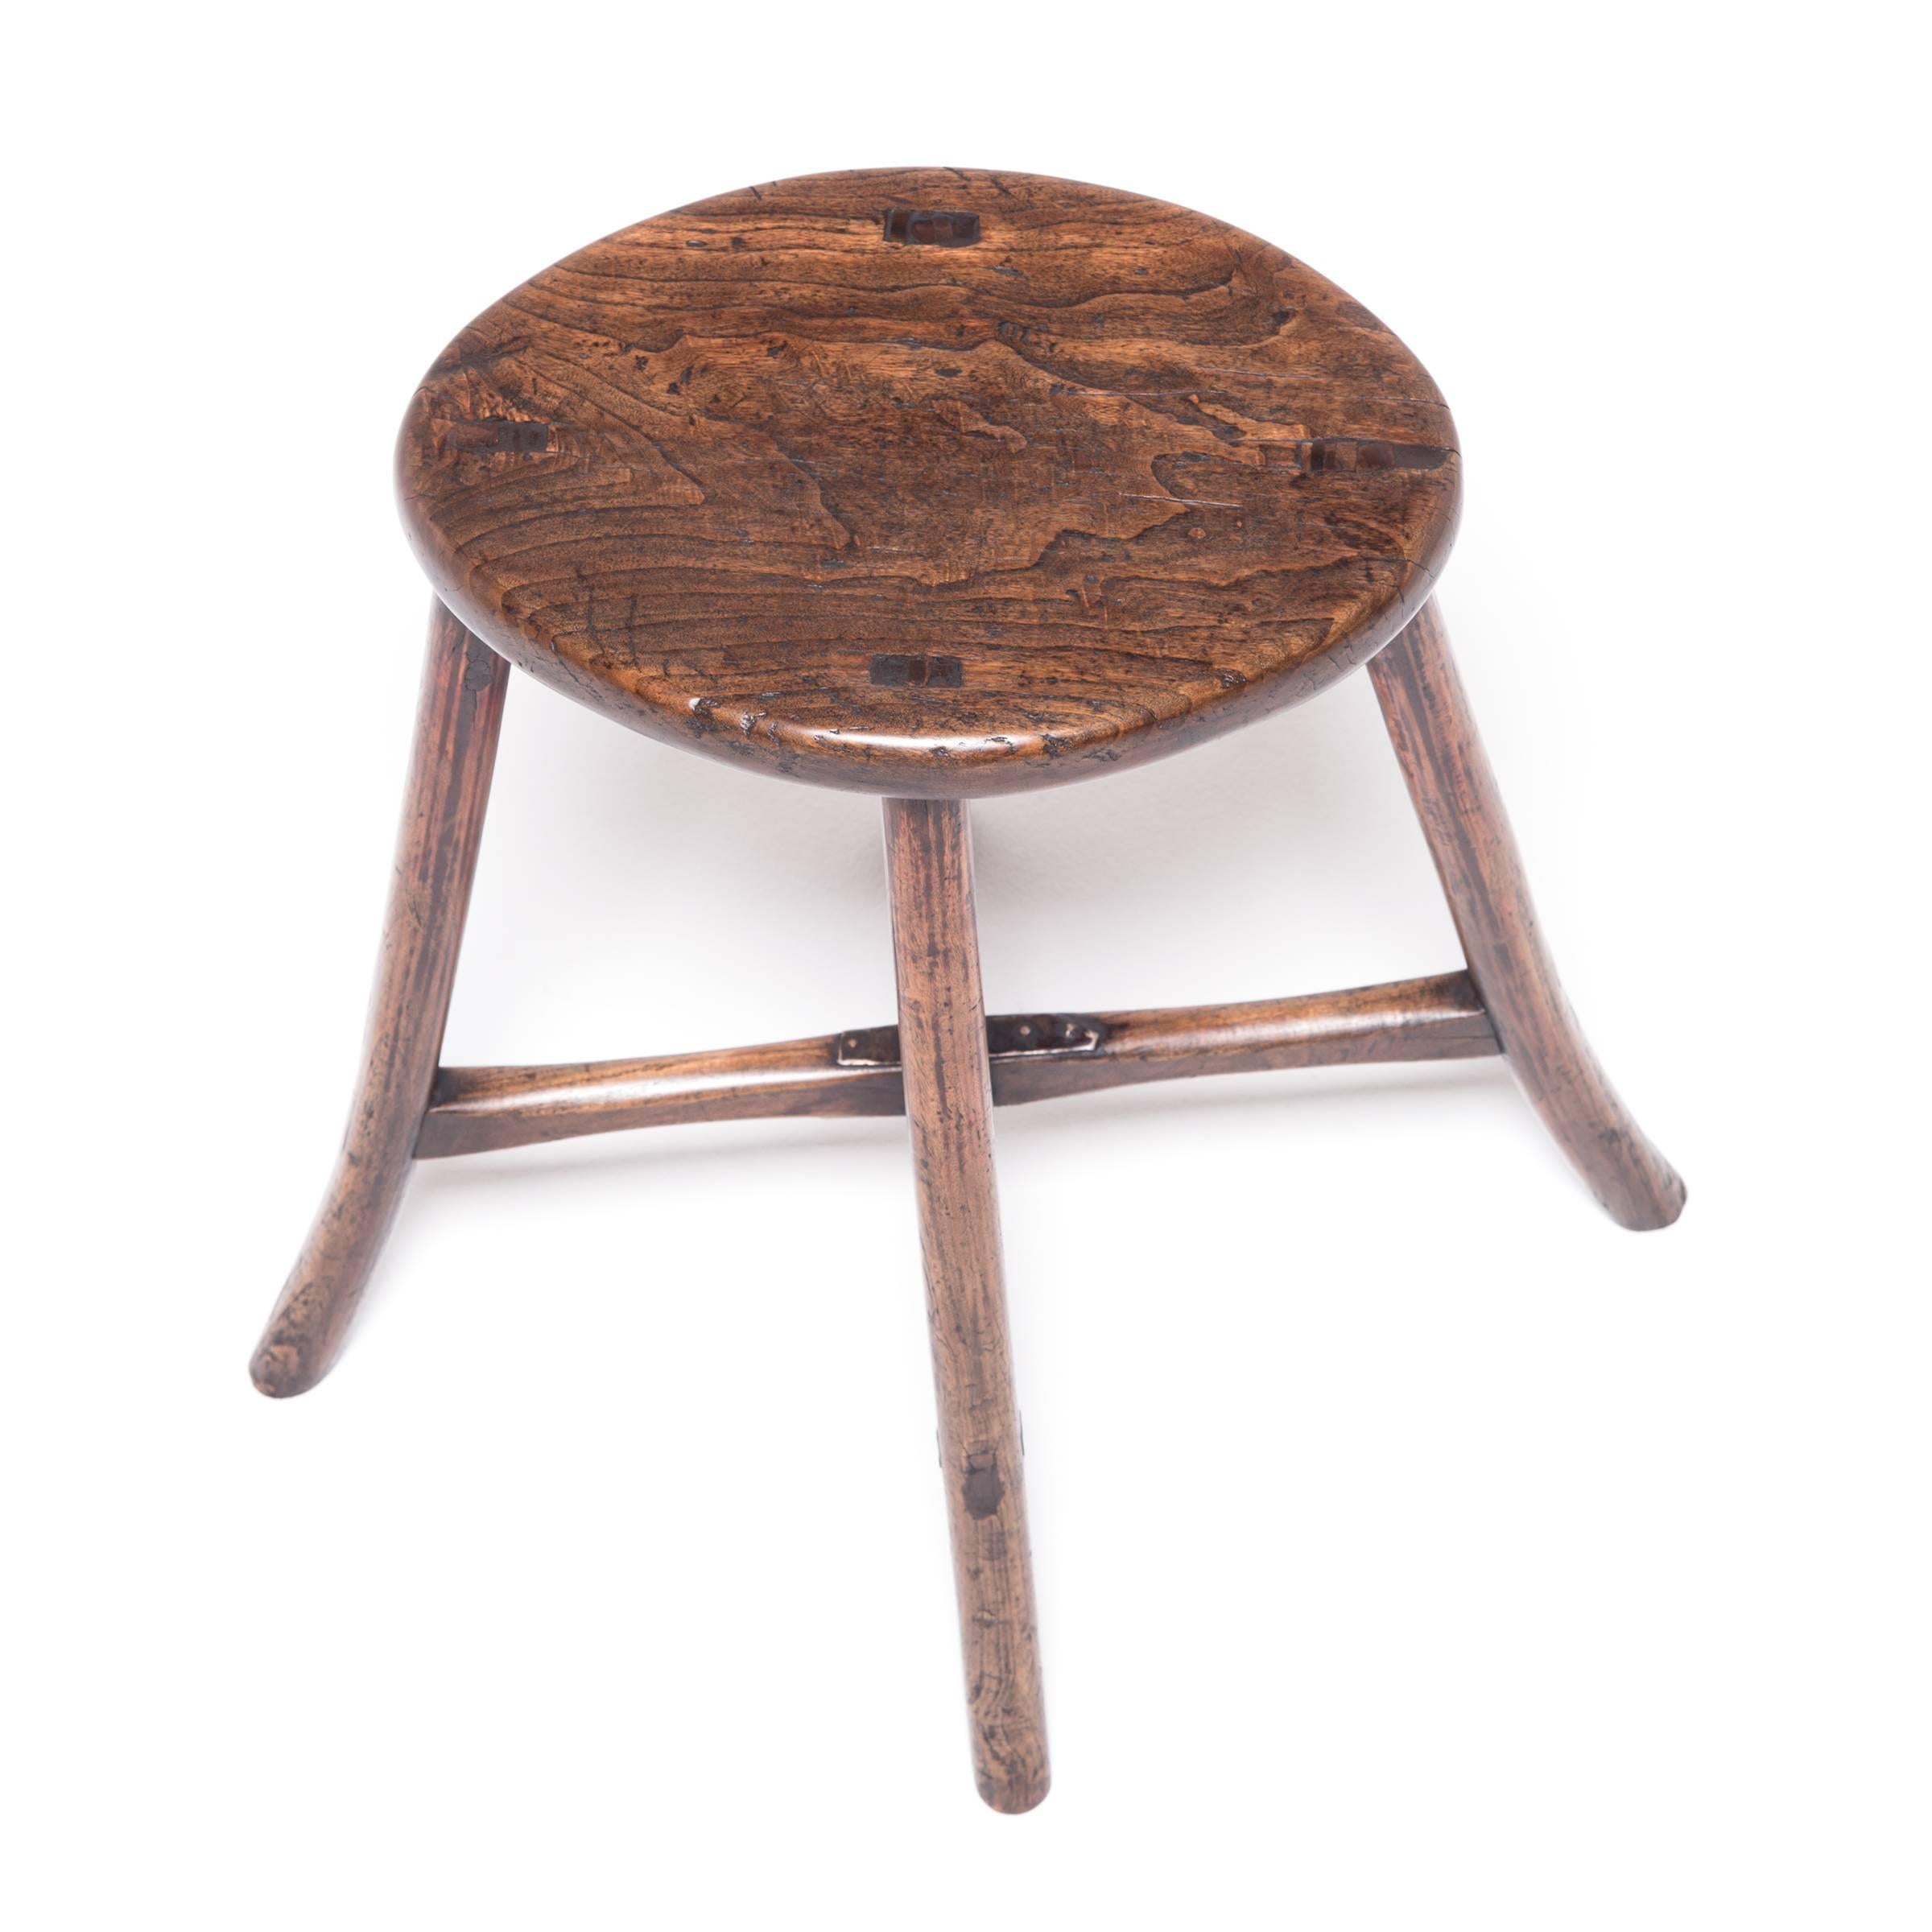 The traditional squared lines of Ming furniture are given a distinctive curved flair in this Provincial stool. The oval seat and slightly flared legs combine for a dynamic and fluid form. The wood has aged with rich character that adds great texture